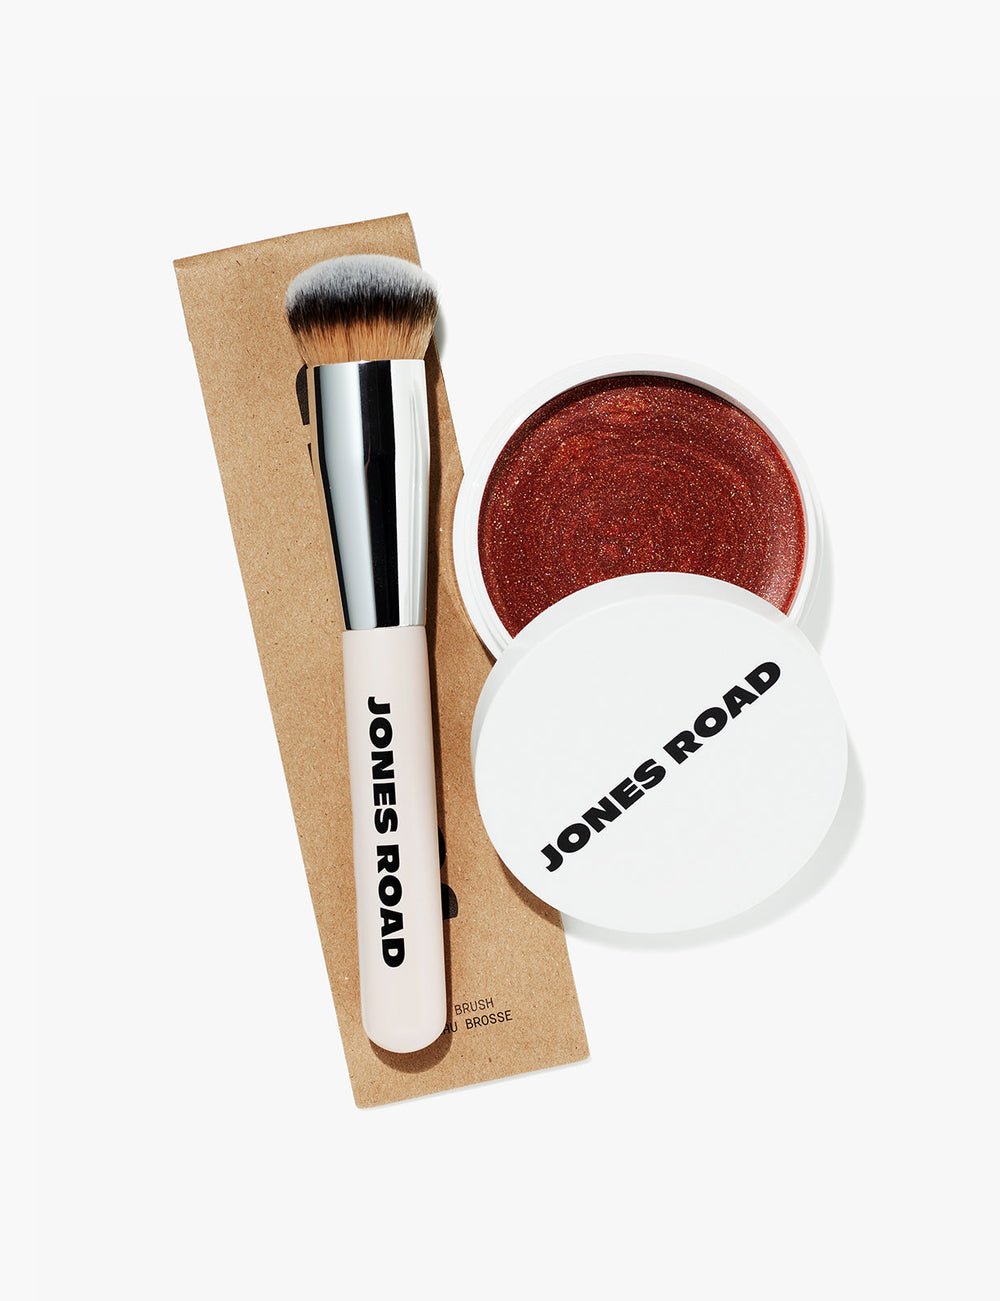 The Everything Brush pictured with Jones Road Beauty's Miracle Balm in Tawny